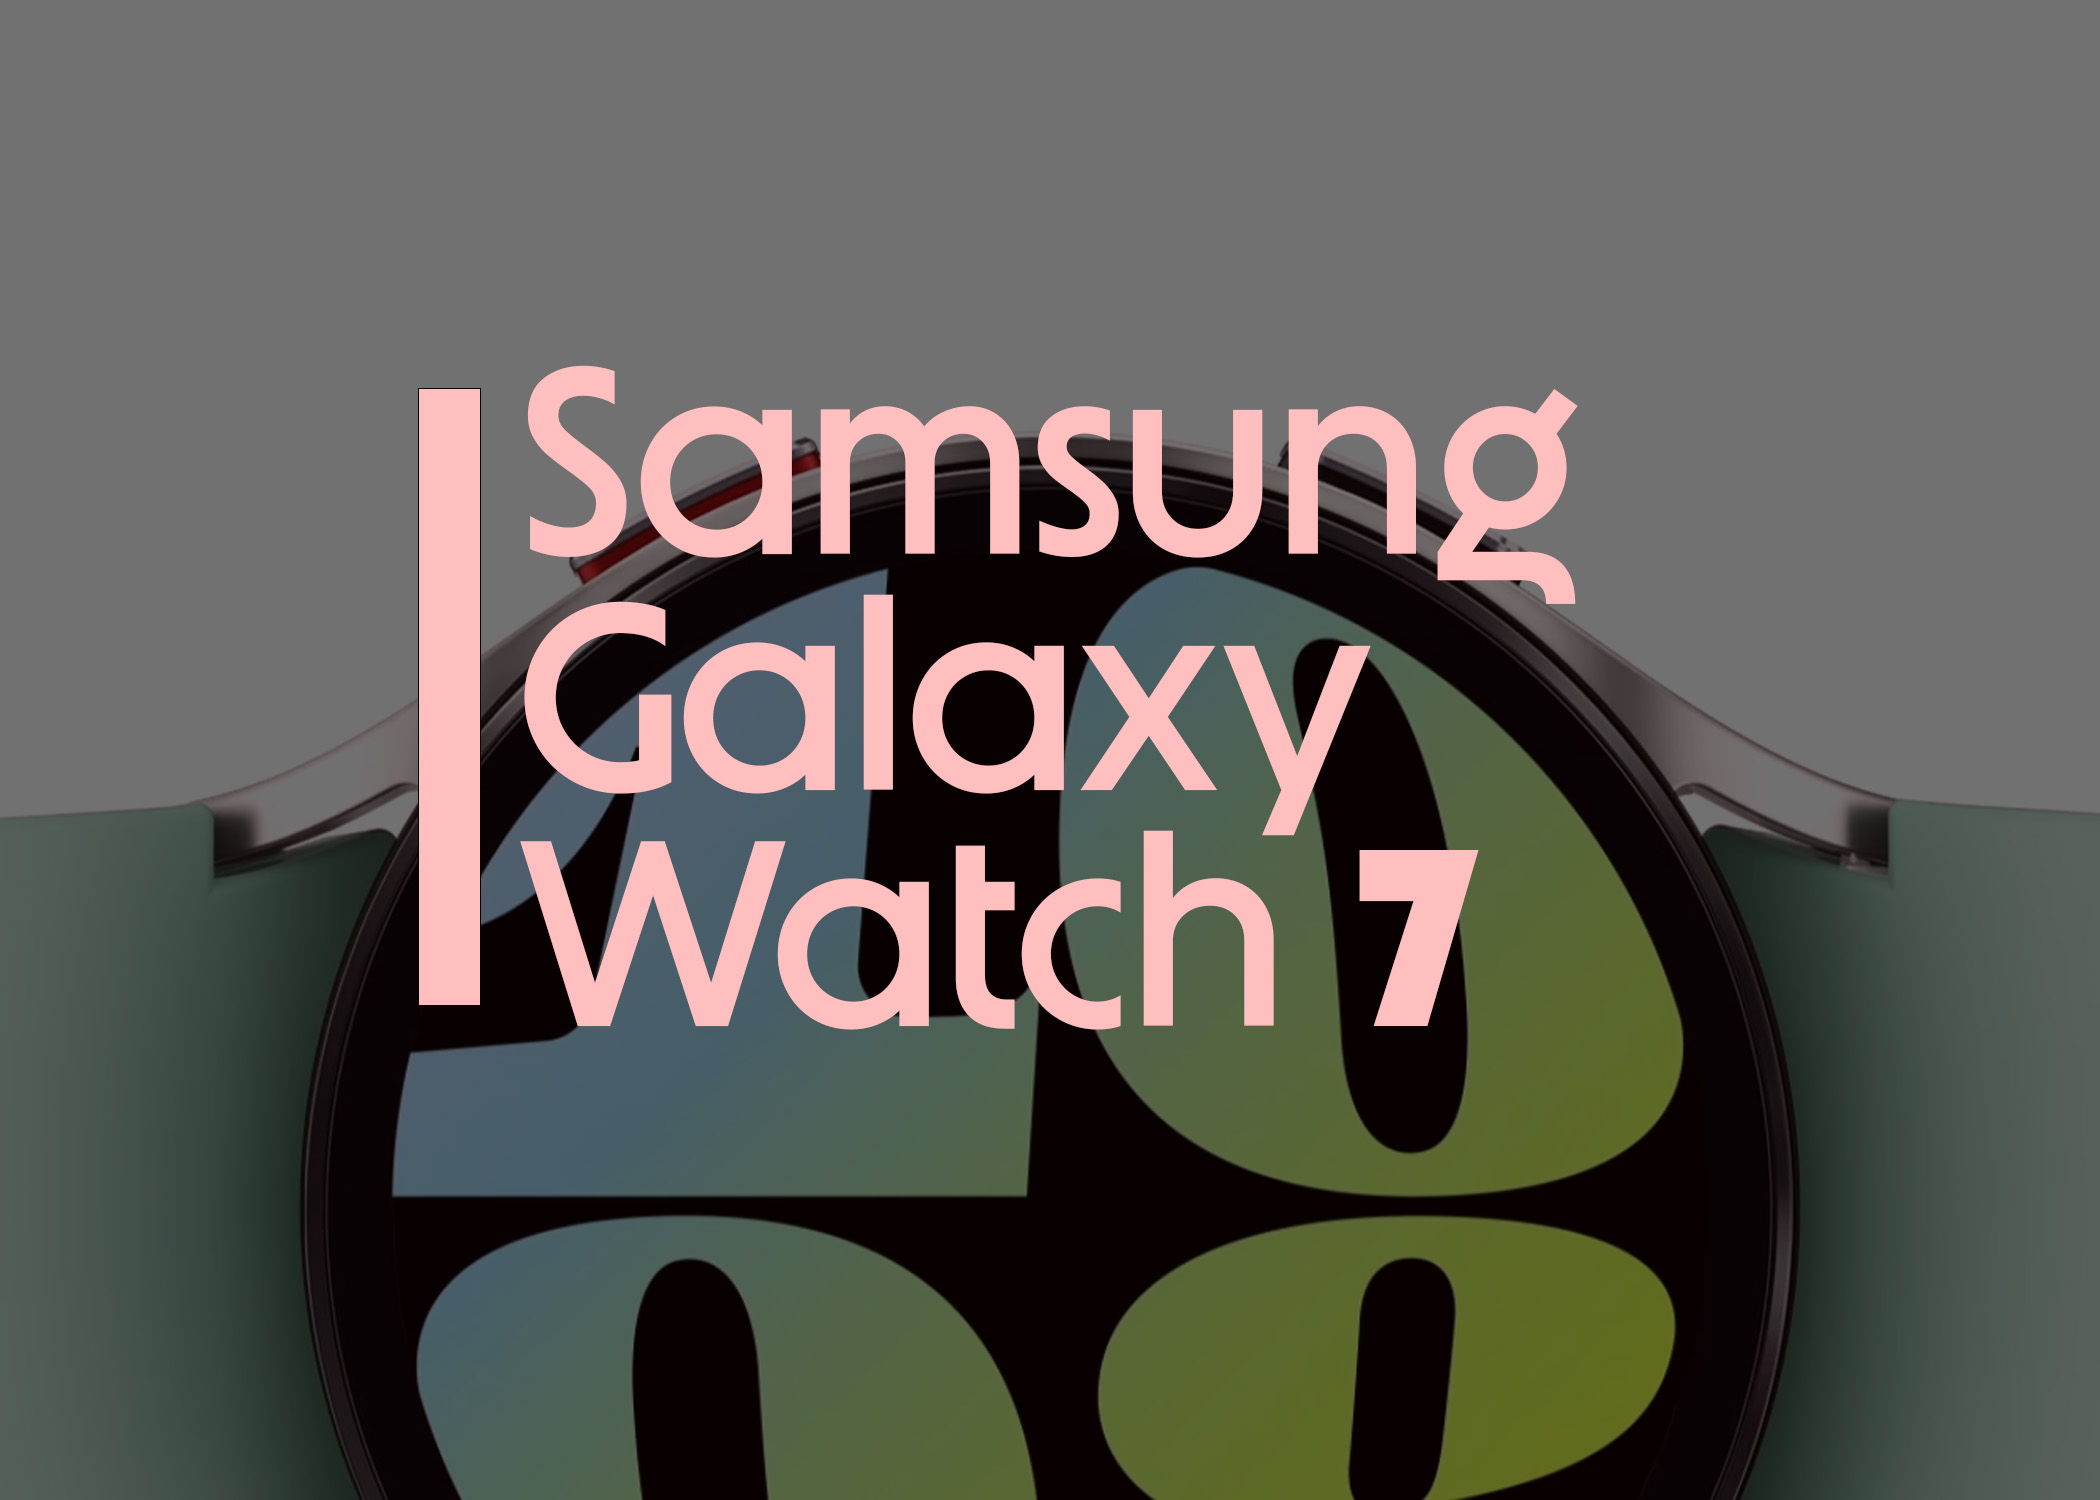 Samsung Galaxy Watch 7: A Potential Game-Changer